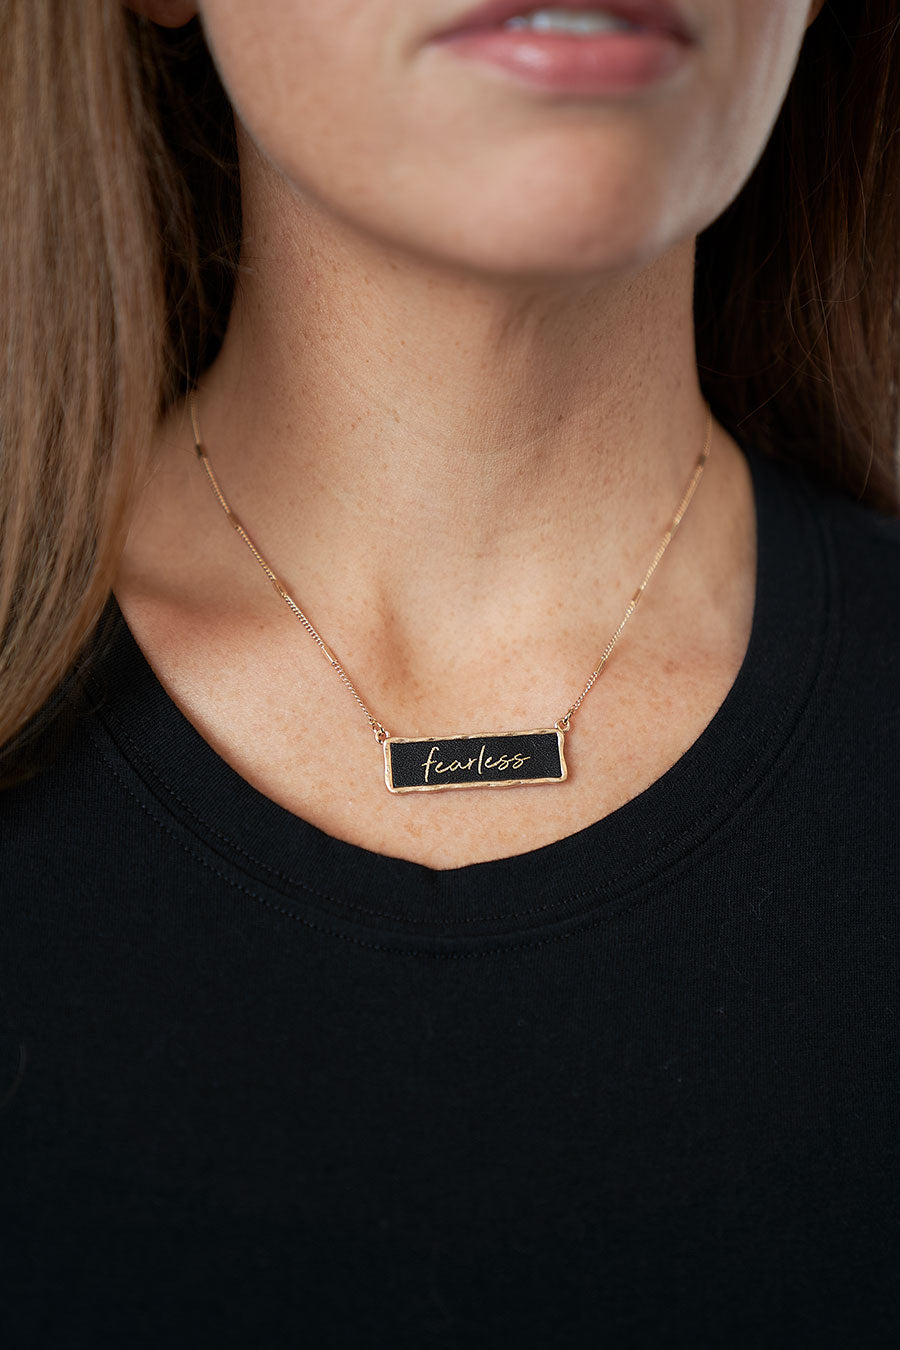 Fearless Necklace Wearing